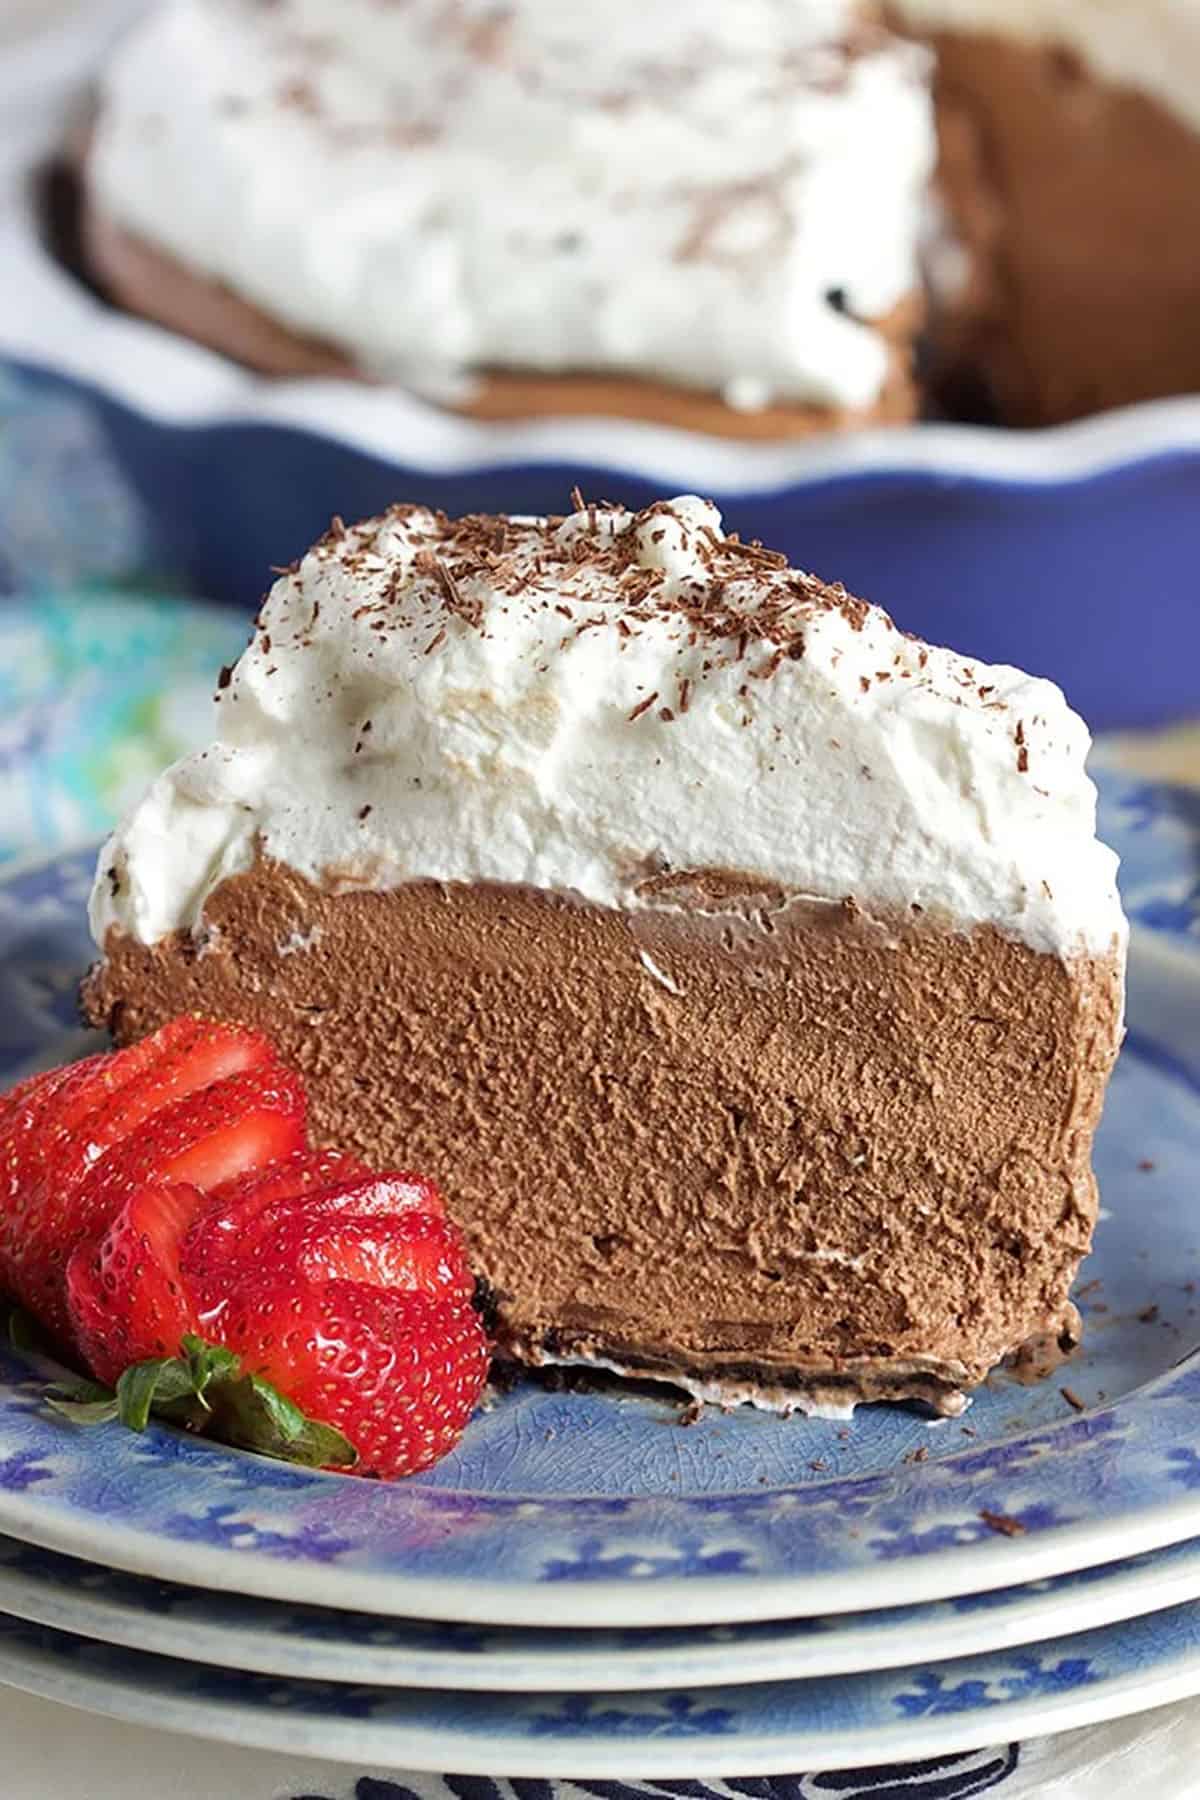 Chocolate Mousse Pie slice on a blue plate with a strawberry.